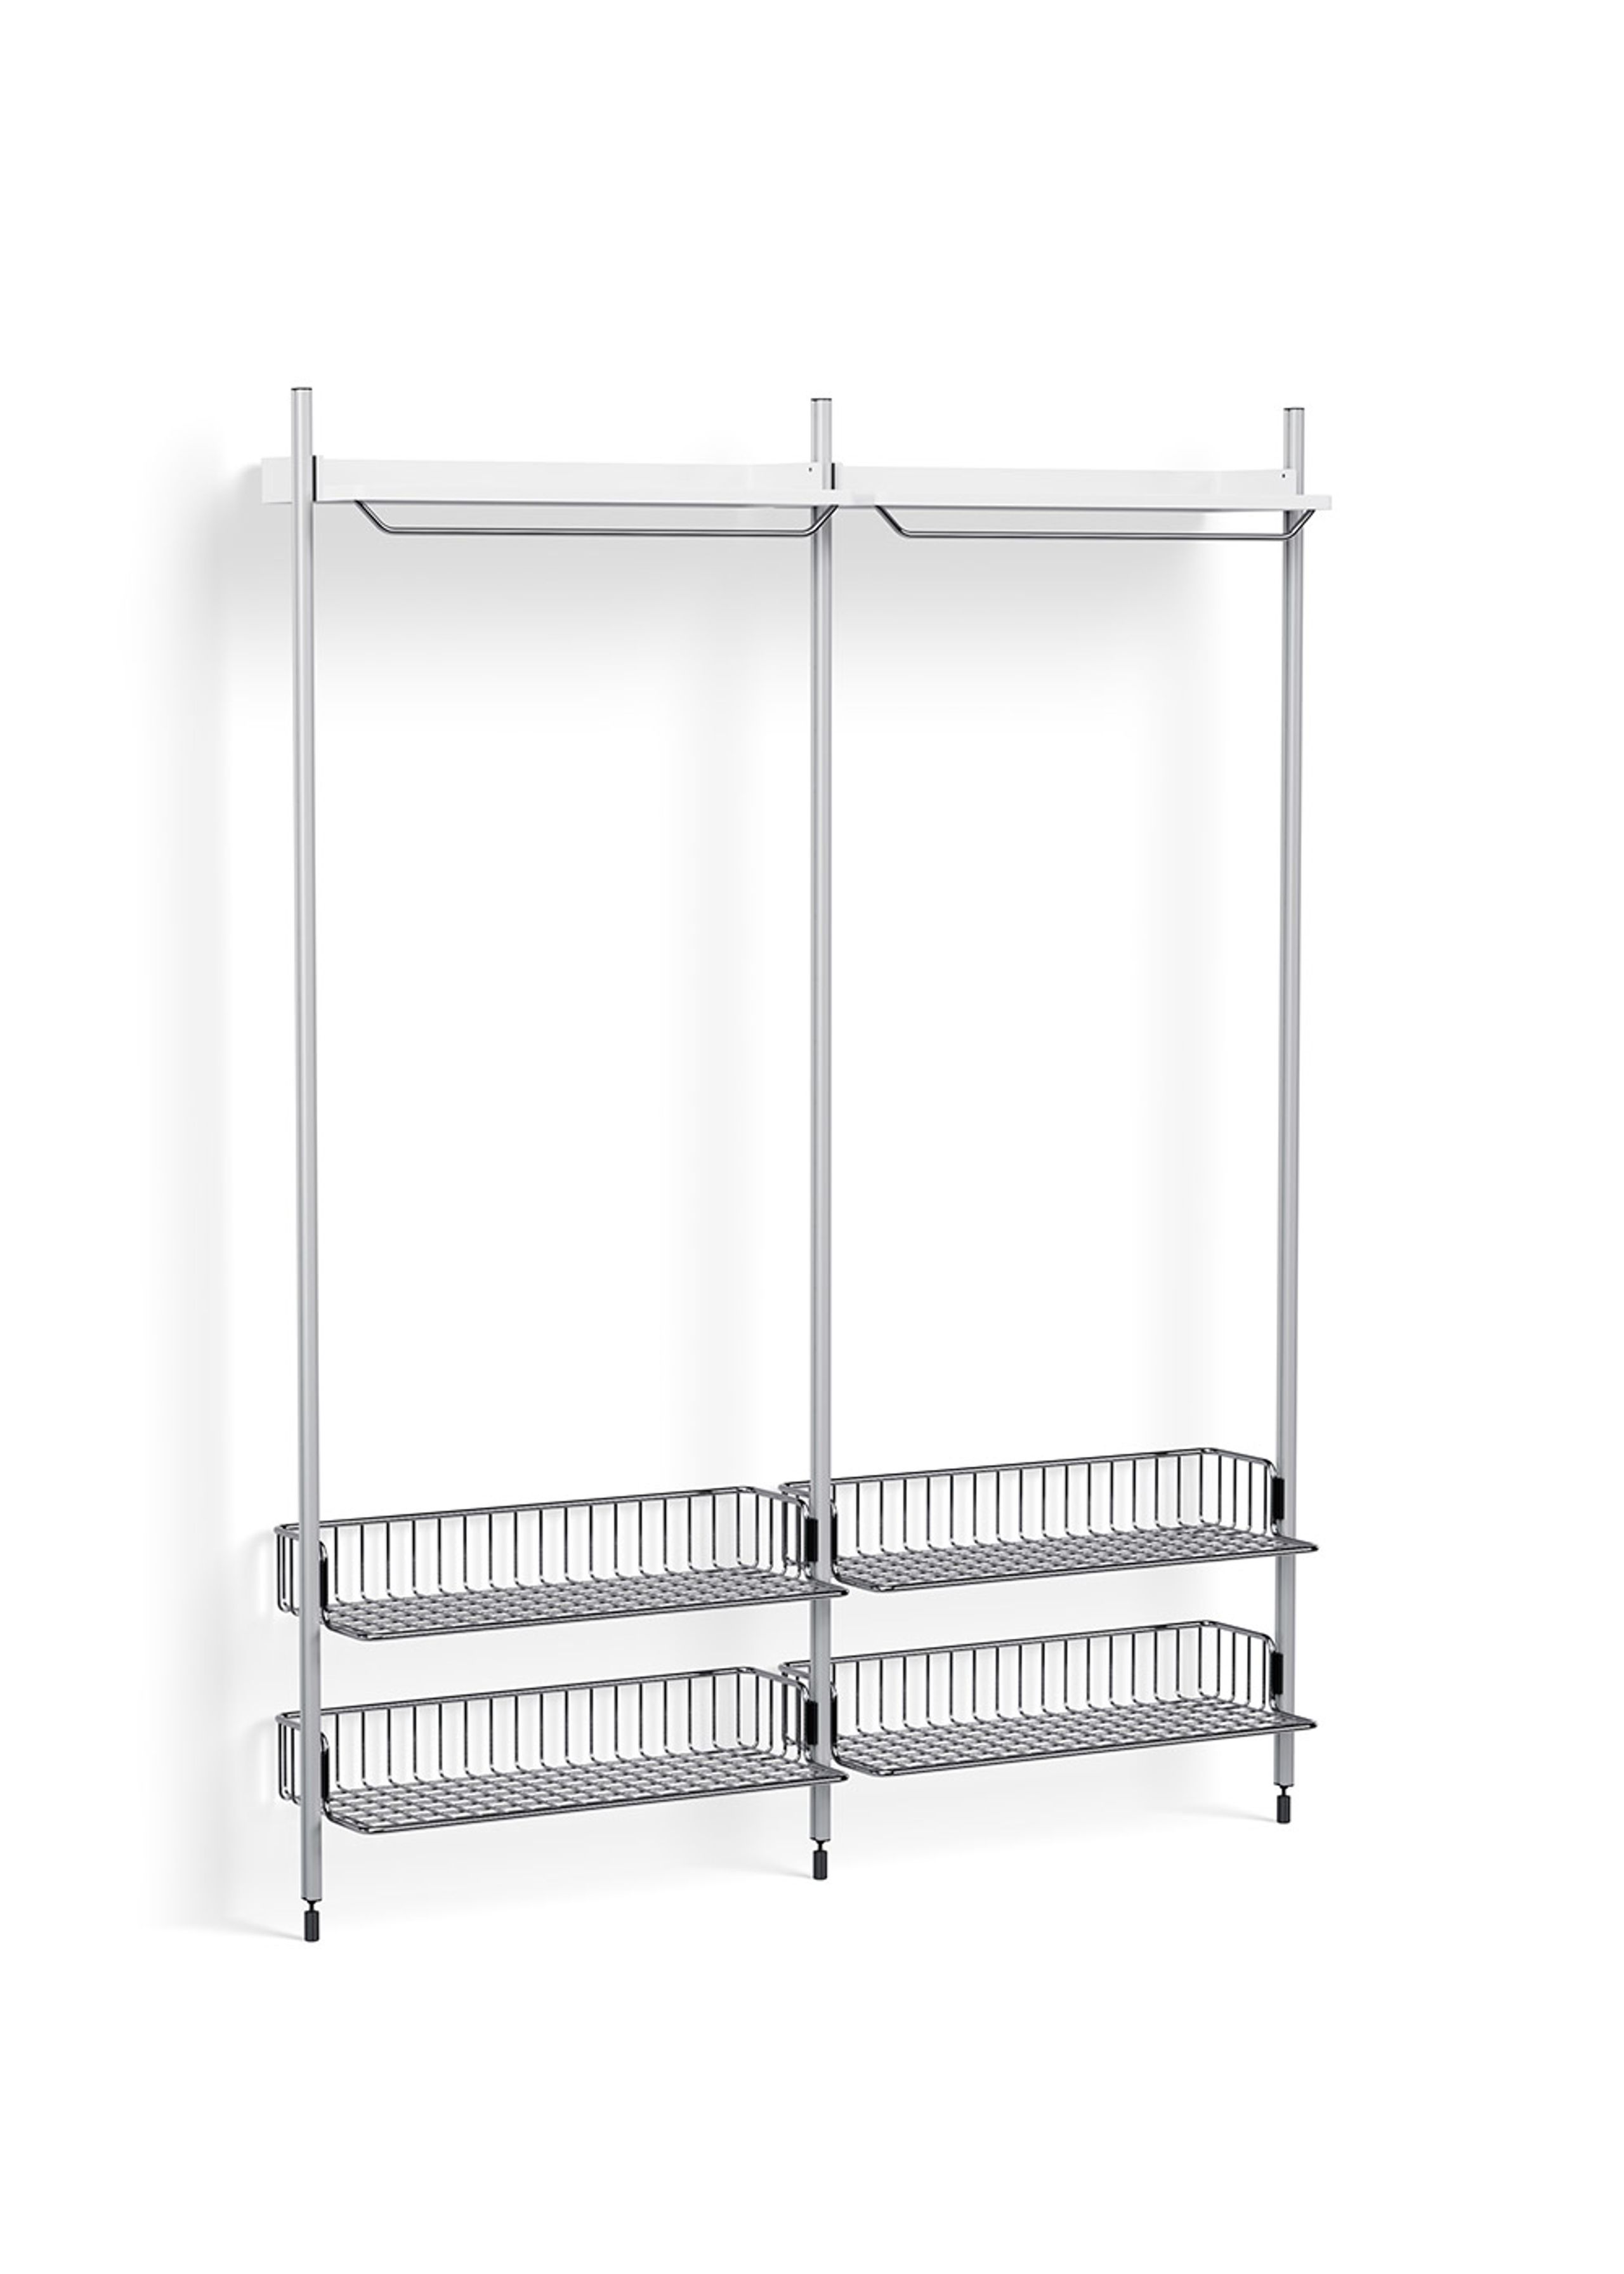 HAY - Reol - Pier System / No. 1012 - White / Clear Anodised Aluminium